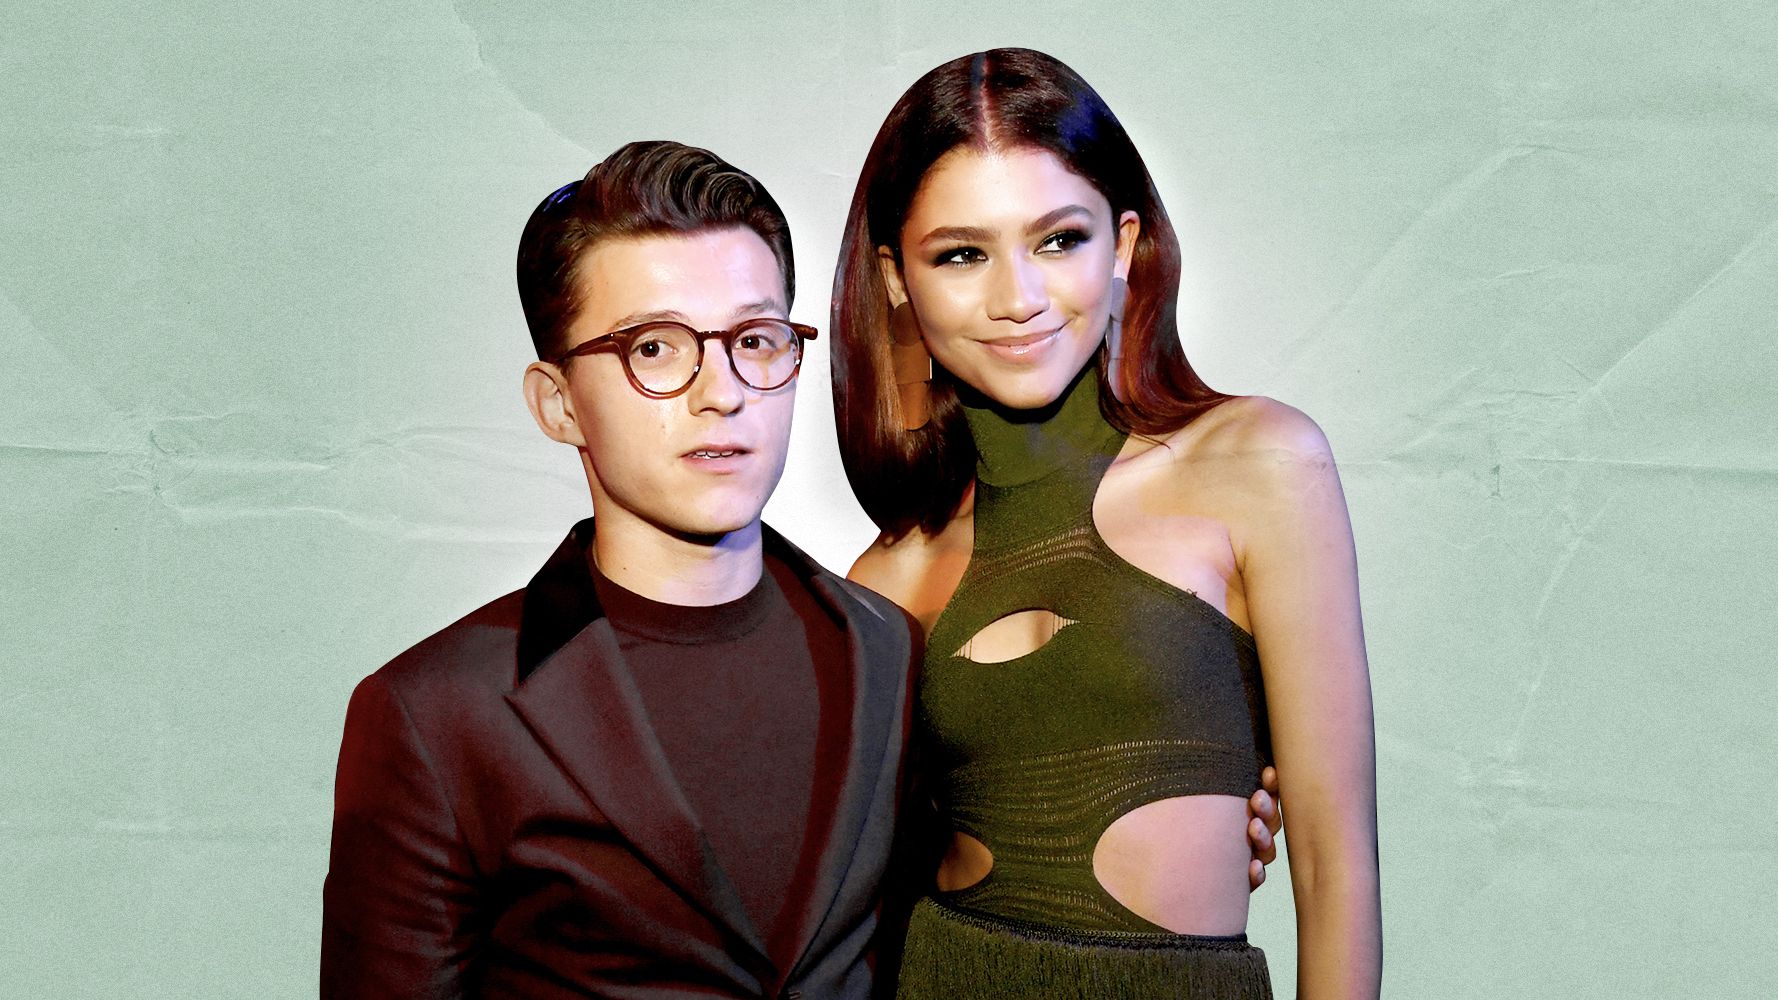 Tom Holland 'All In' With Zendaya From 'The Moment He Met Her